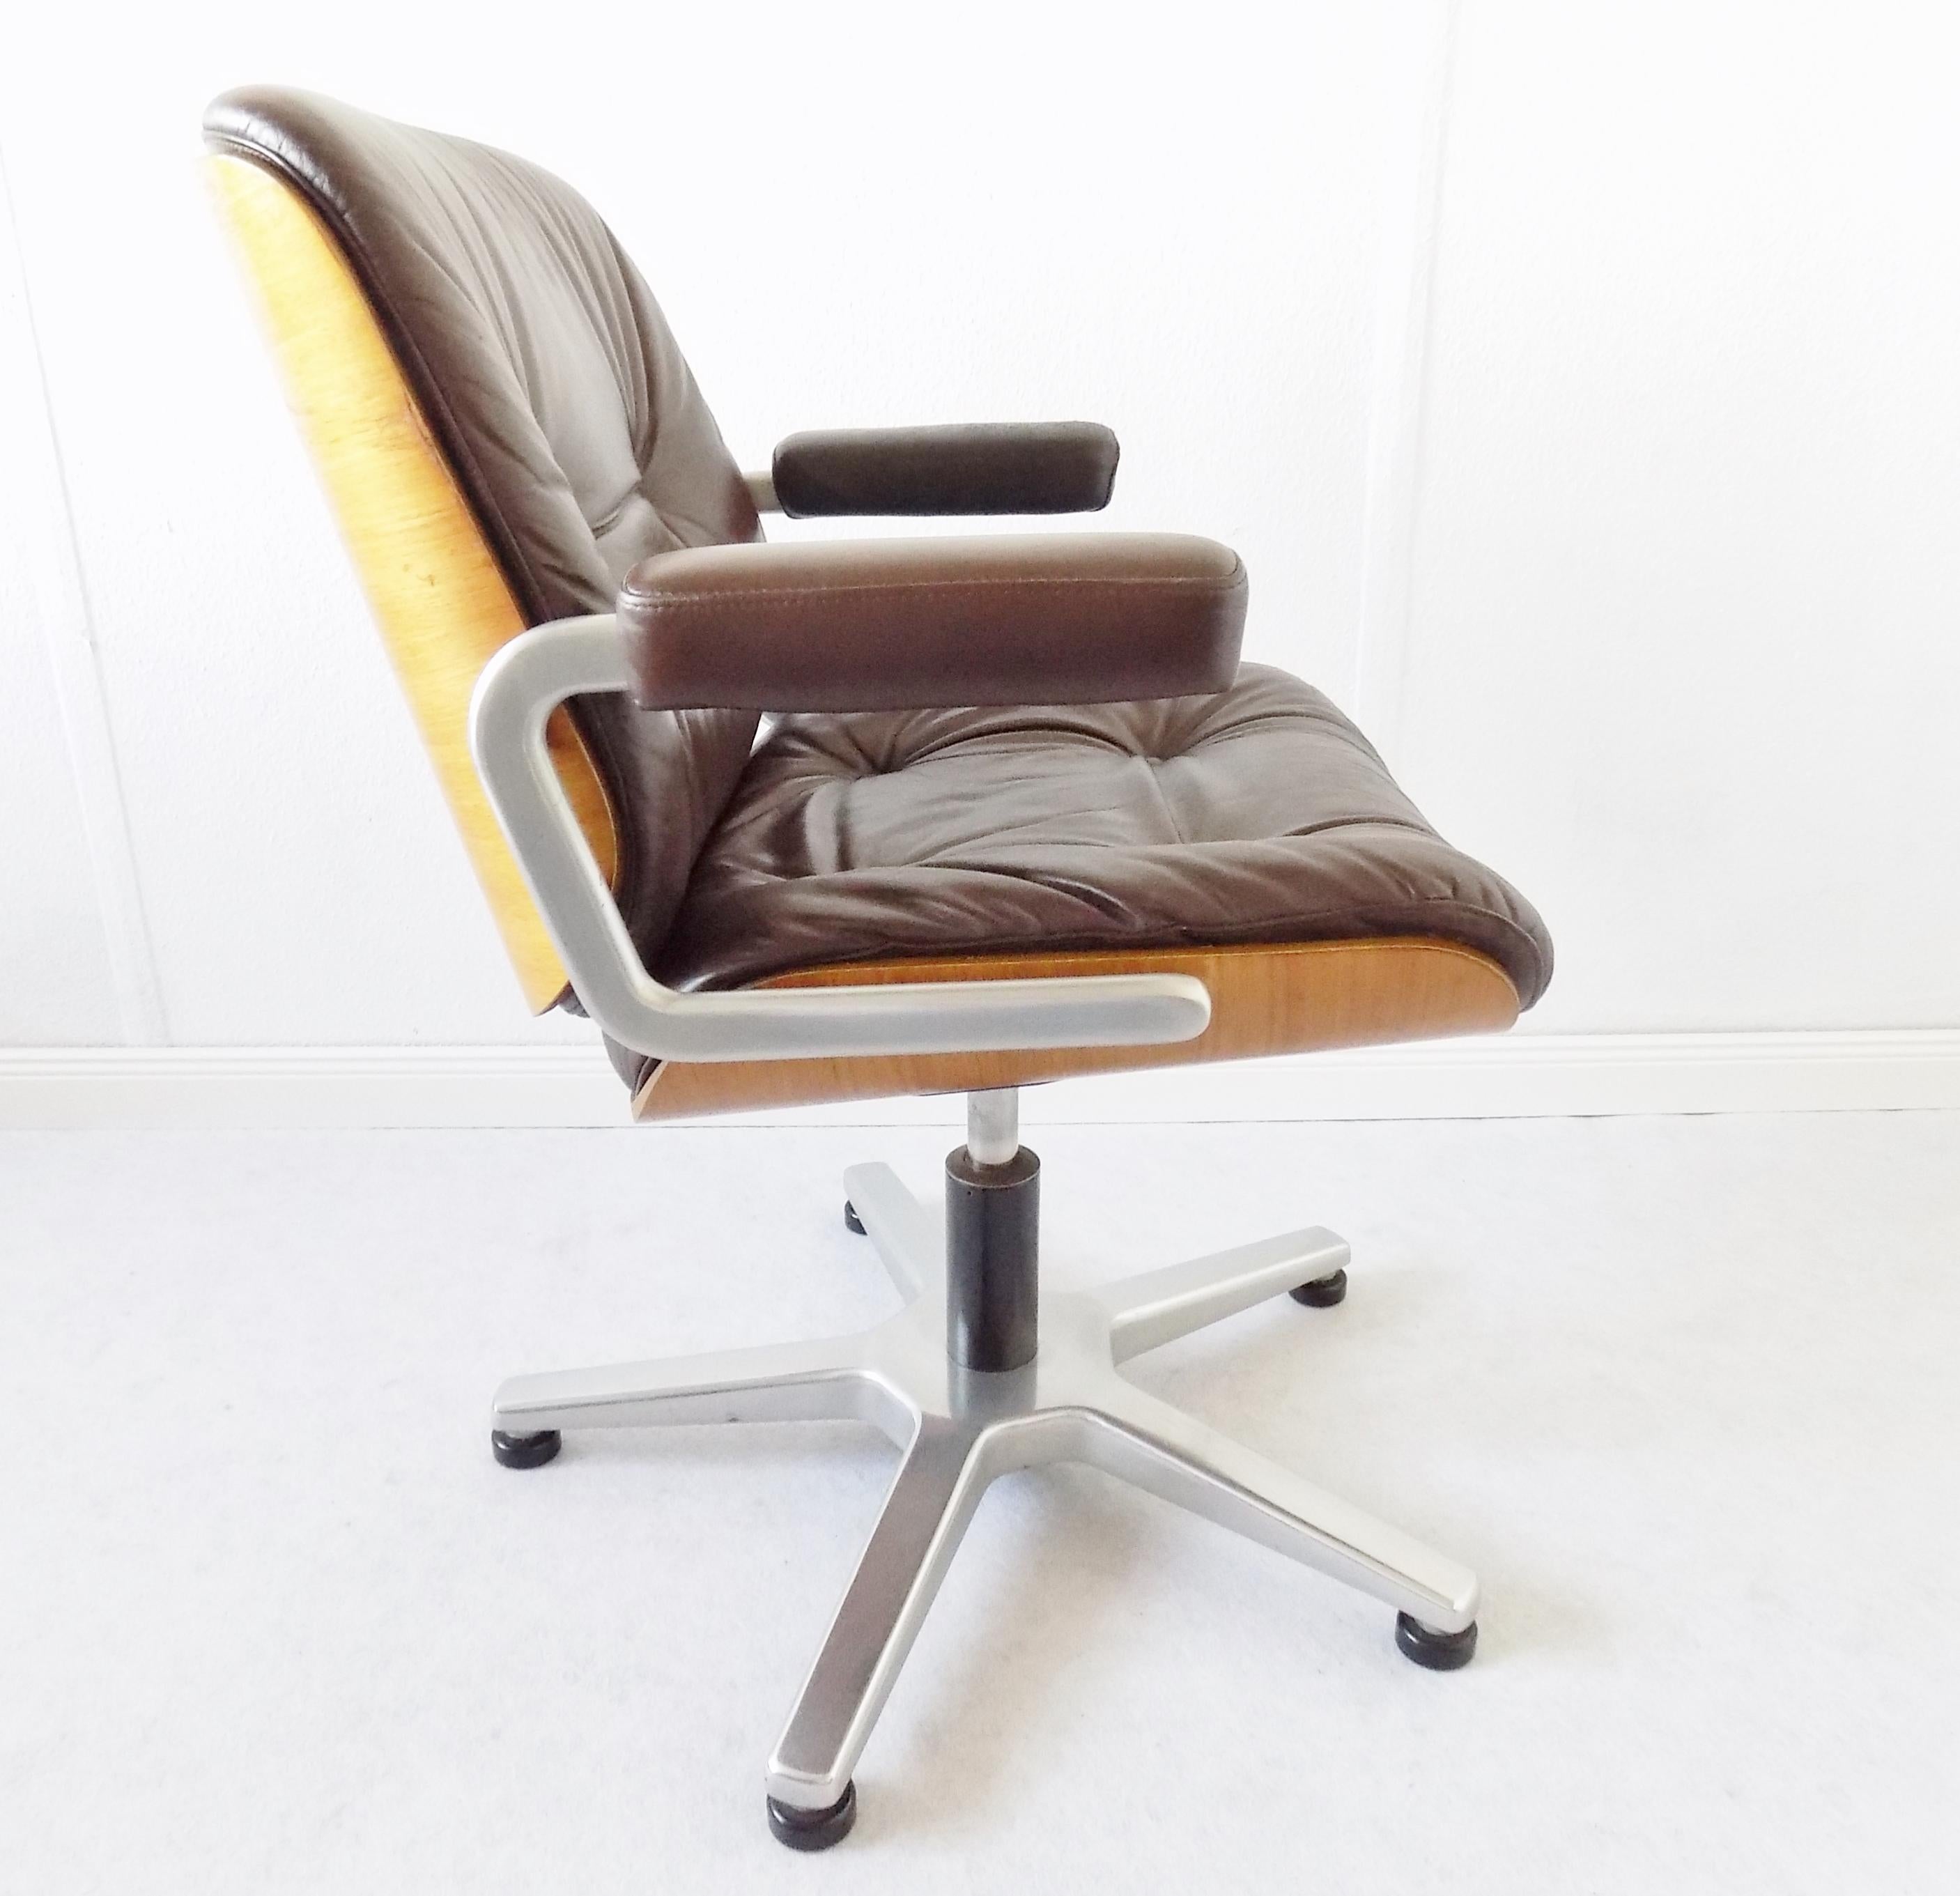 Stoll Giroflex leather office chair by Karl Ditter, Mid-Century Modern, swivel

Extremely comfortable Stoll Giroflex office chair with chocolate brown leather and a warm colored wood shell on the outer backrest. The leather is in excellent